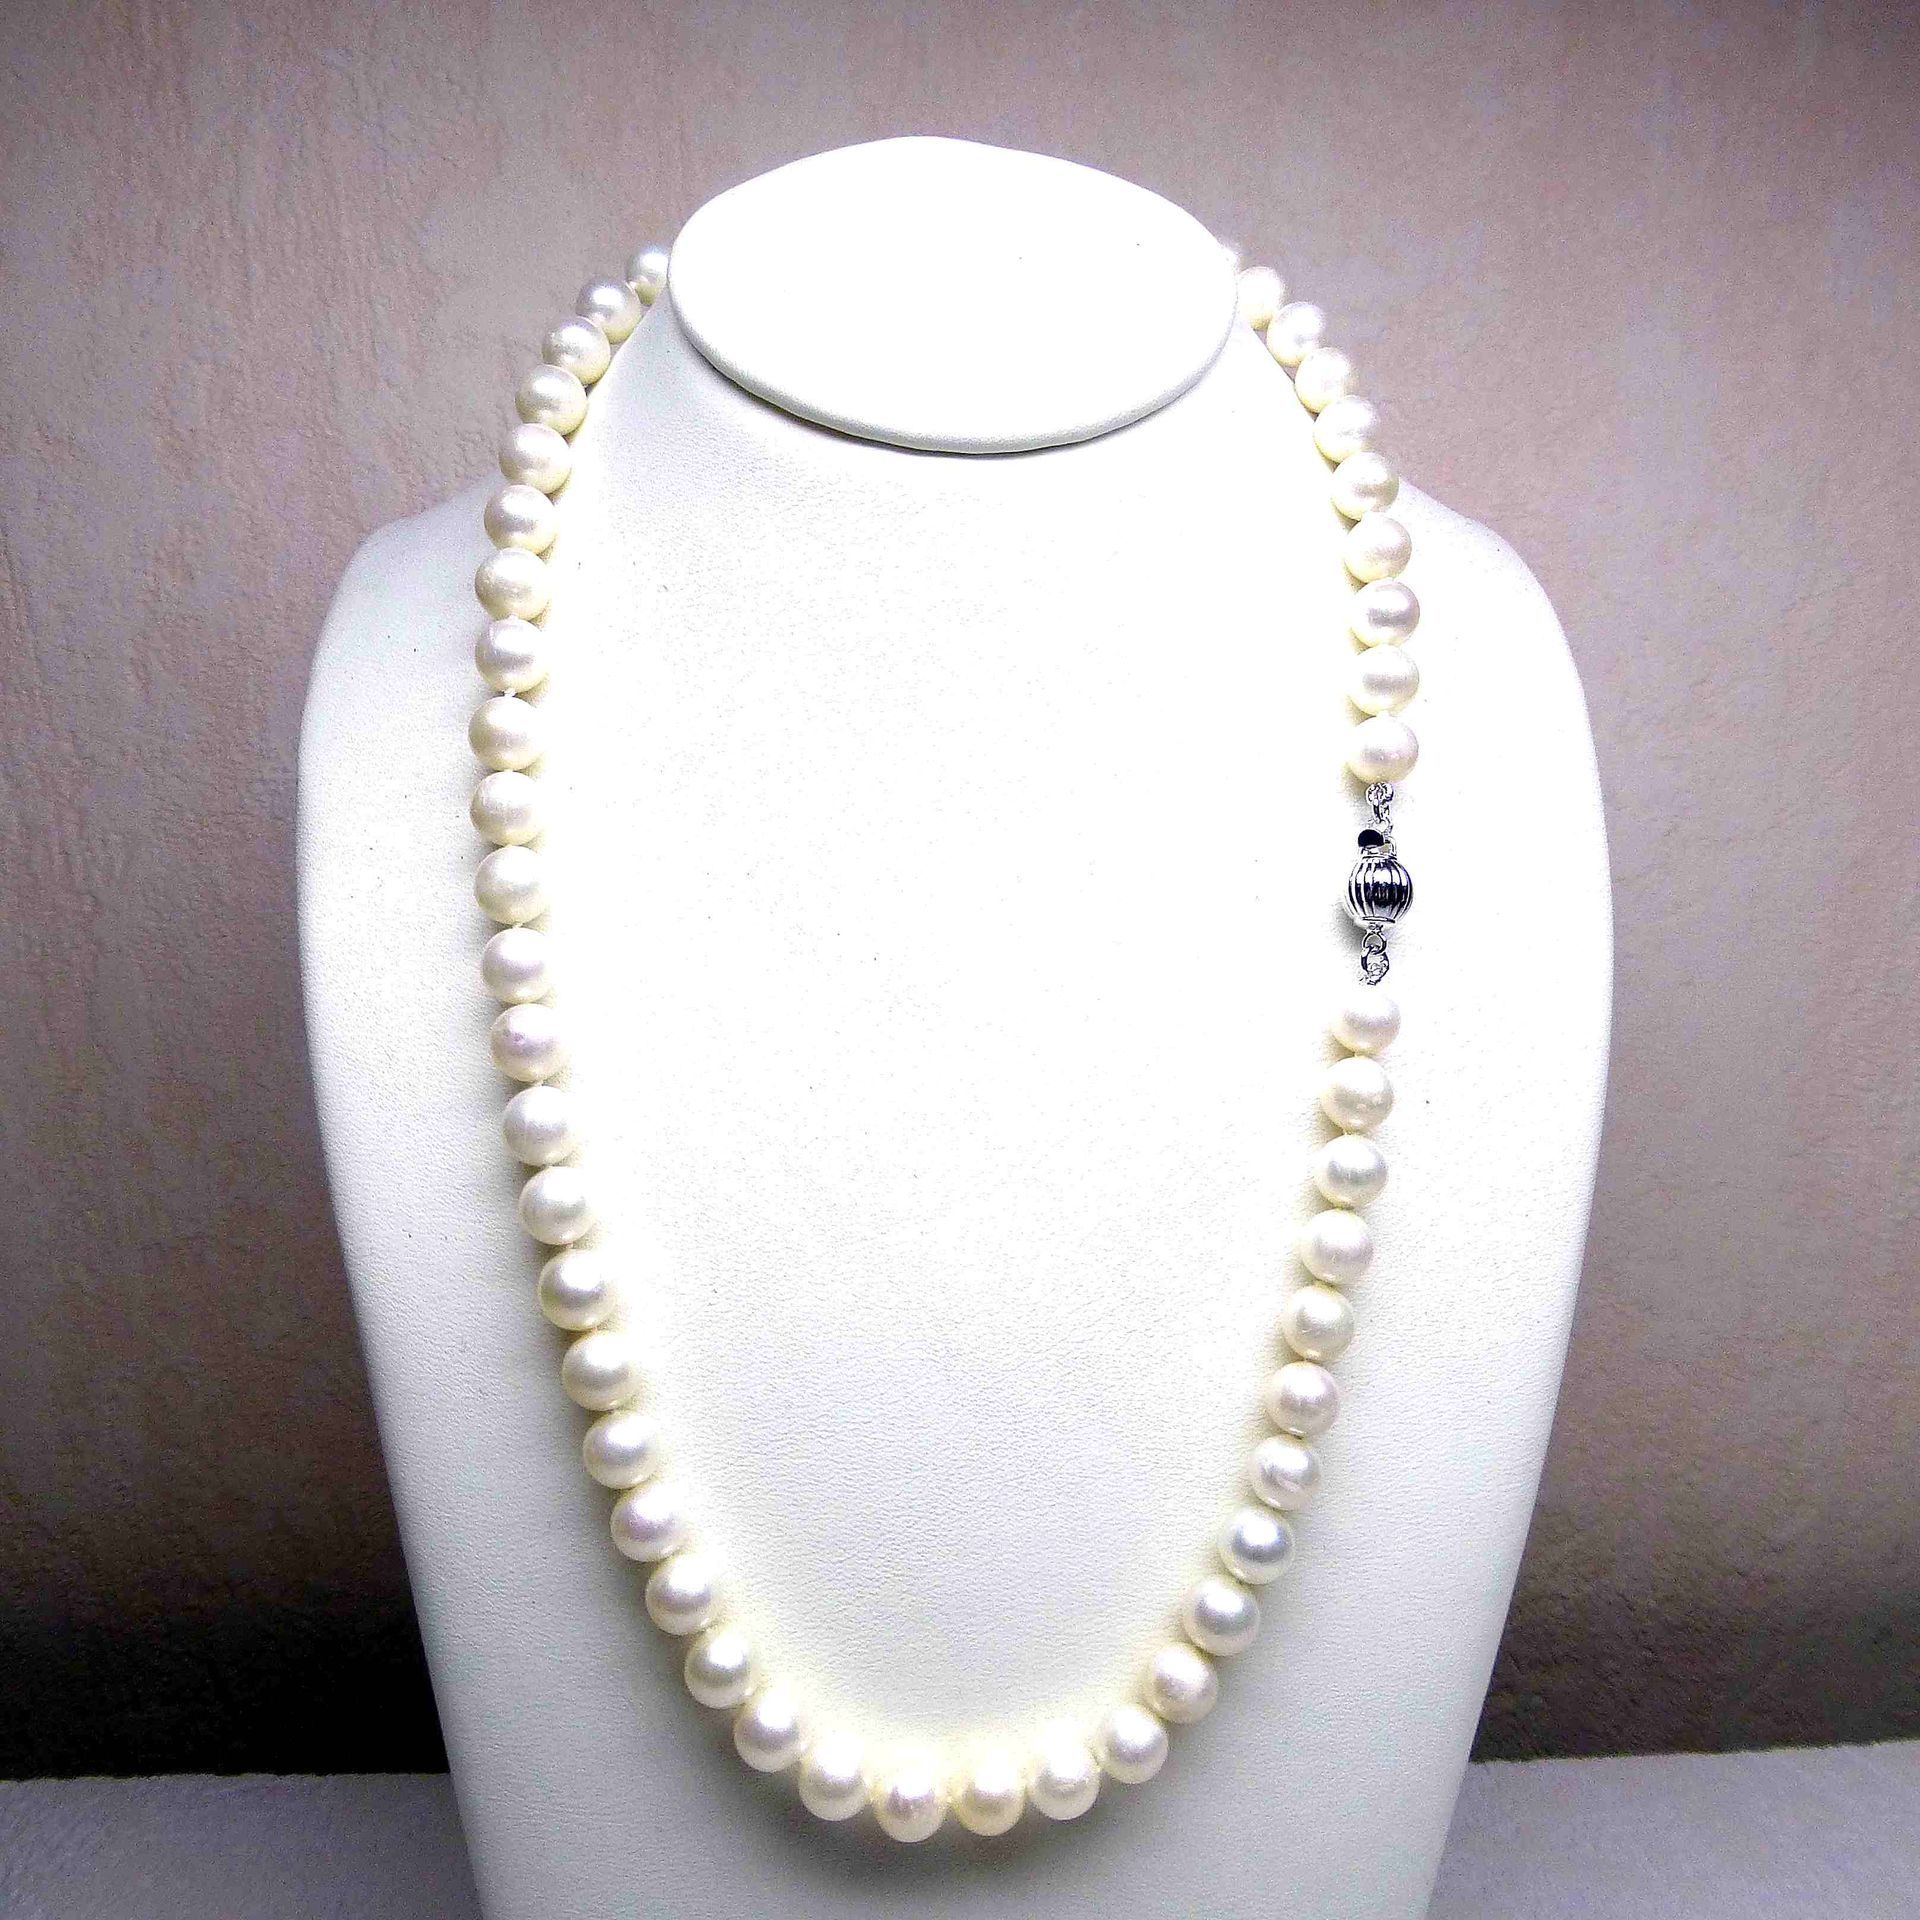 Null A necklace of cultured pearls natur+D11:G81elles diameter 7 - 7.5 mm with a&hellip;